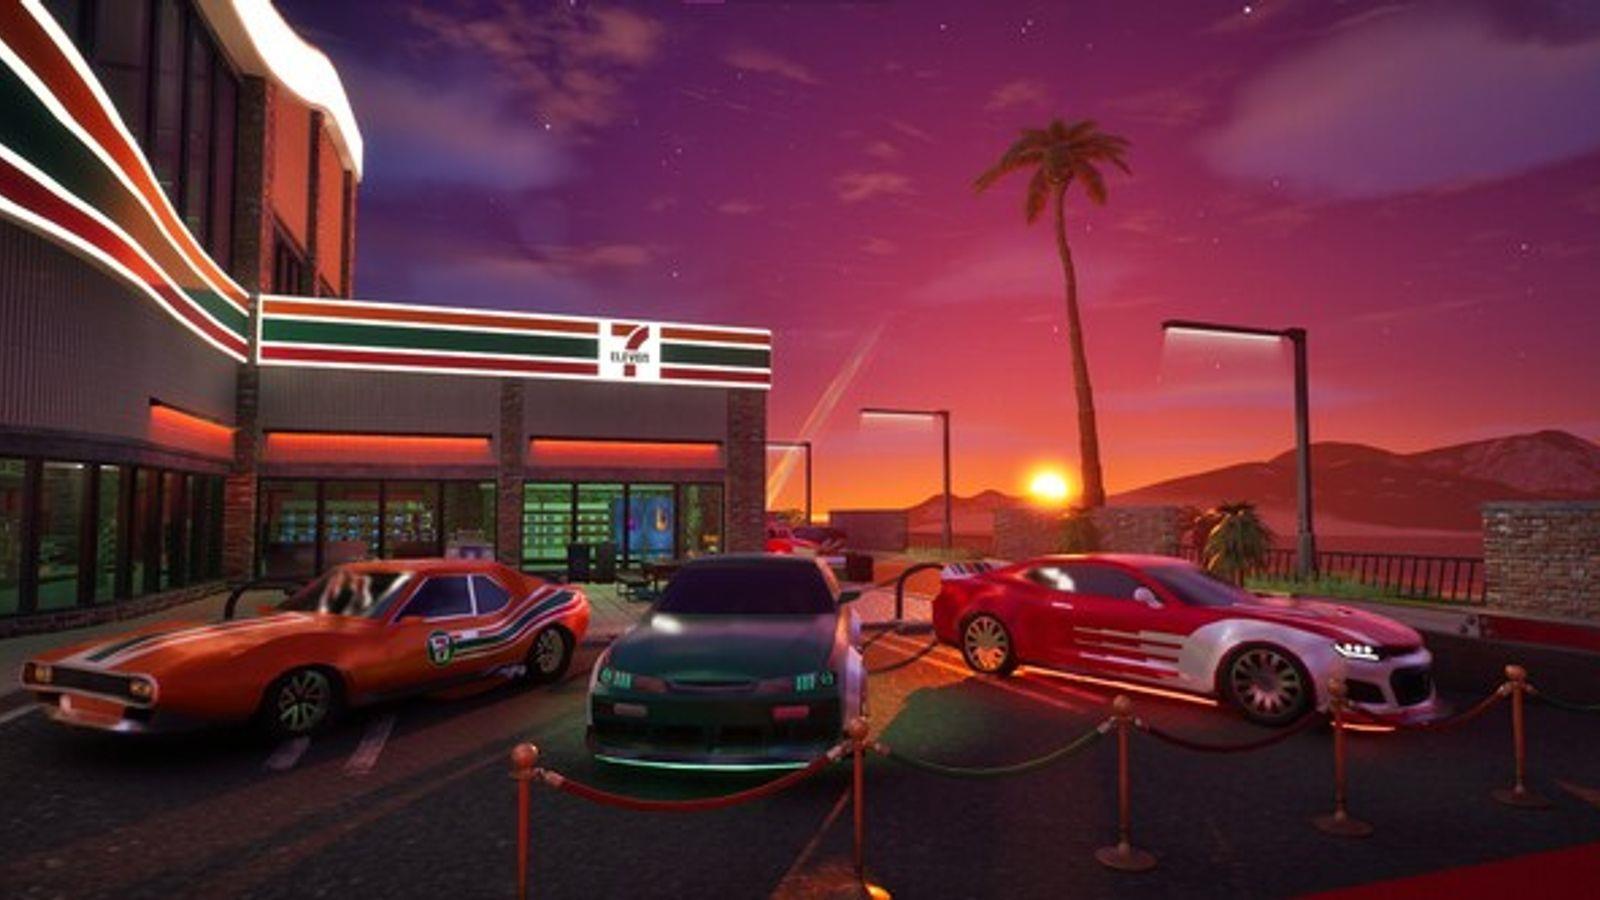 7-Eleven drives in the metaverse with Fortnite activation